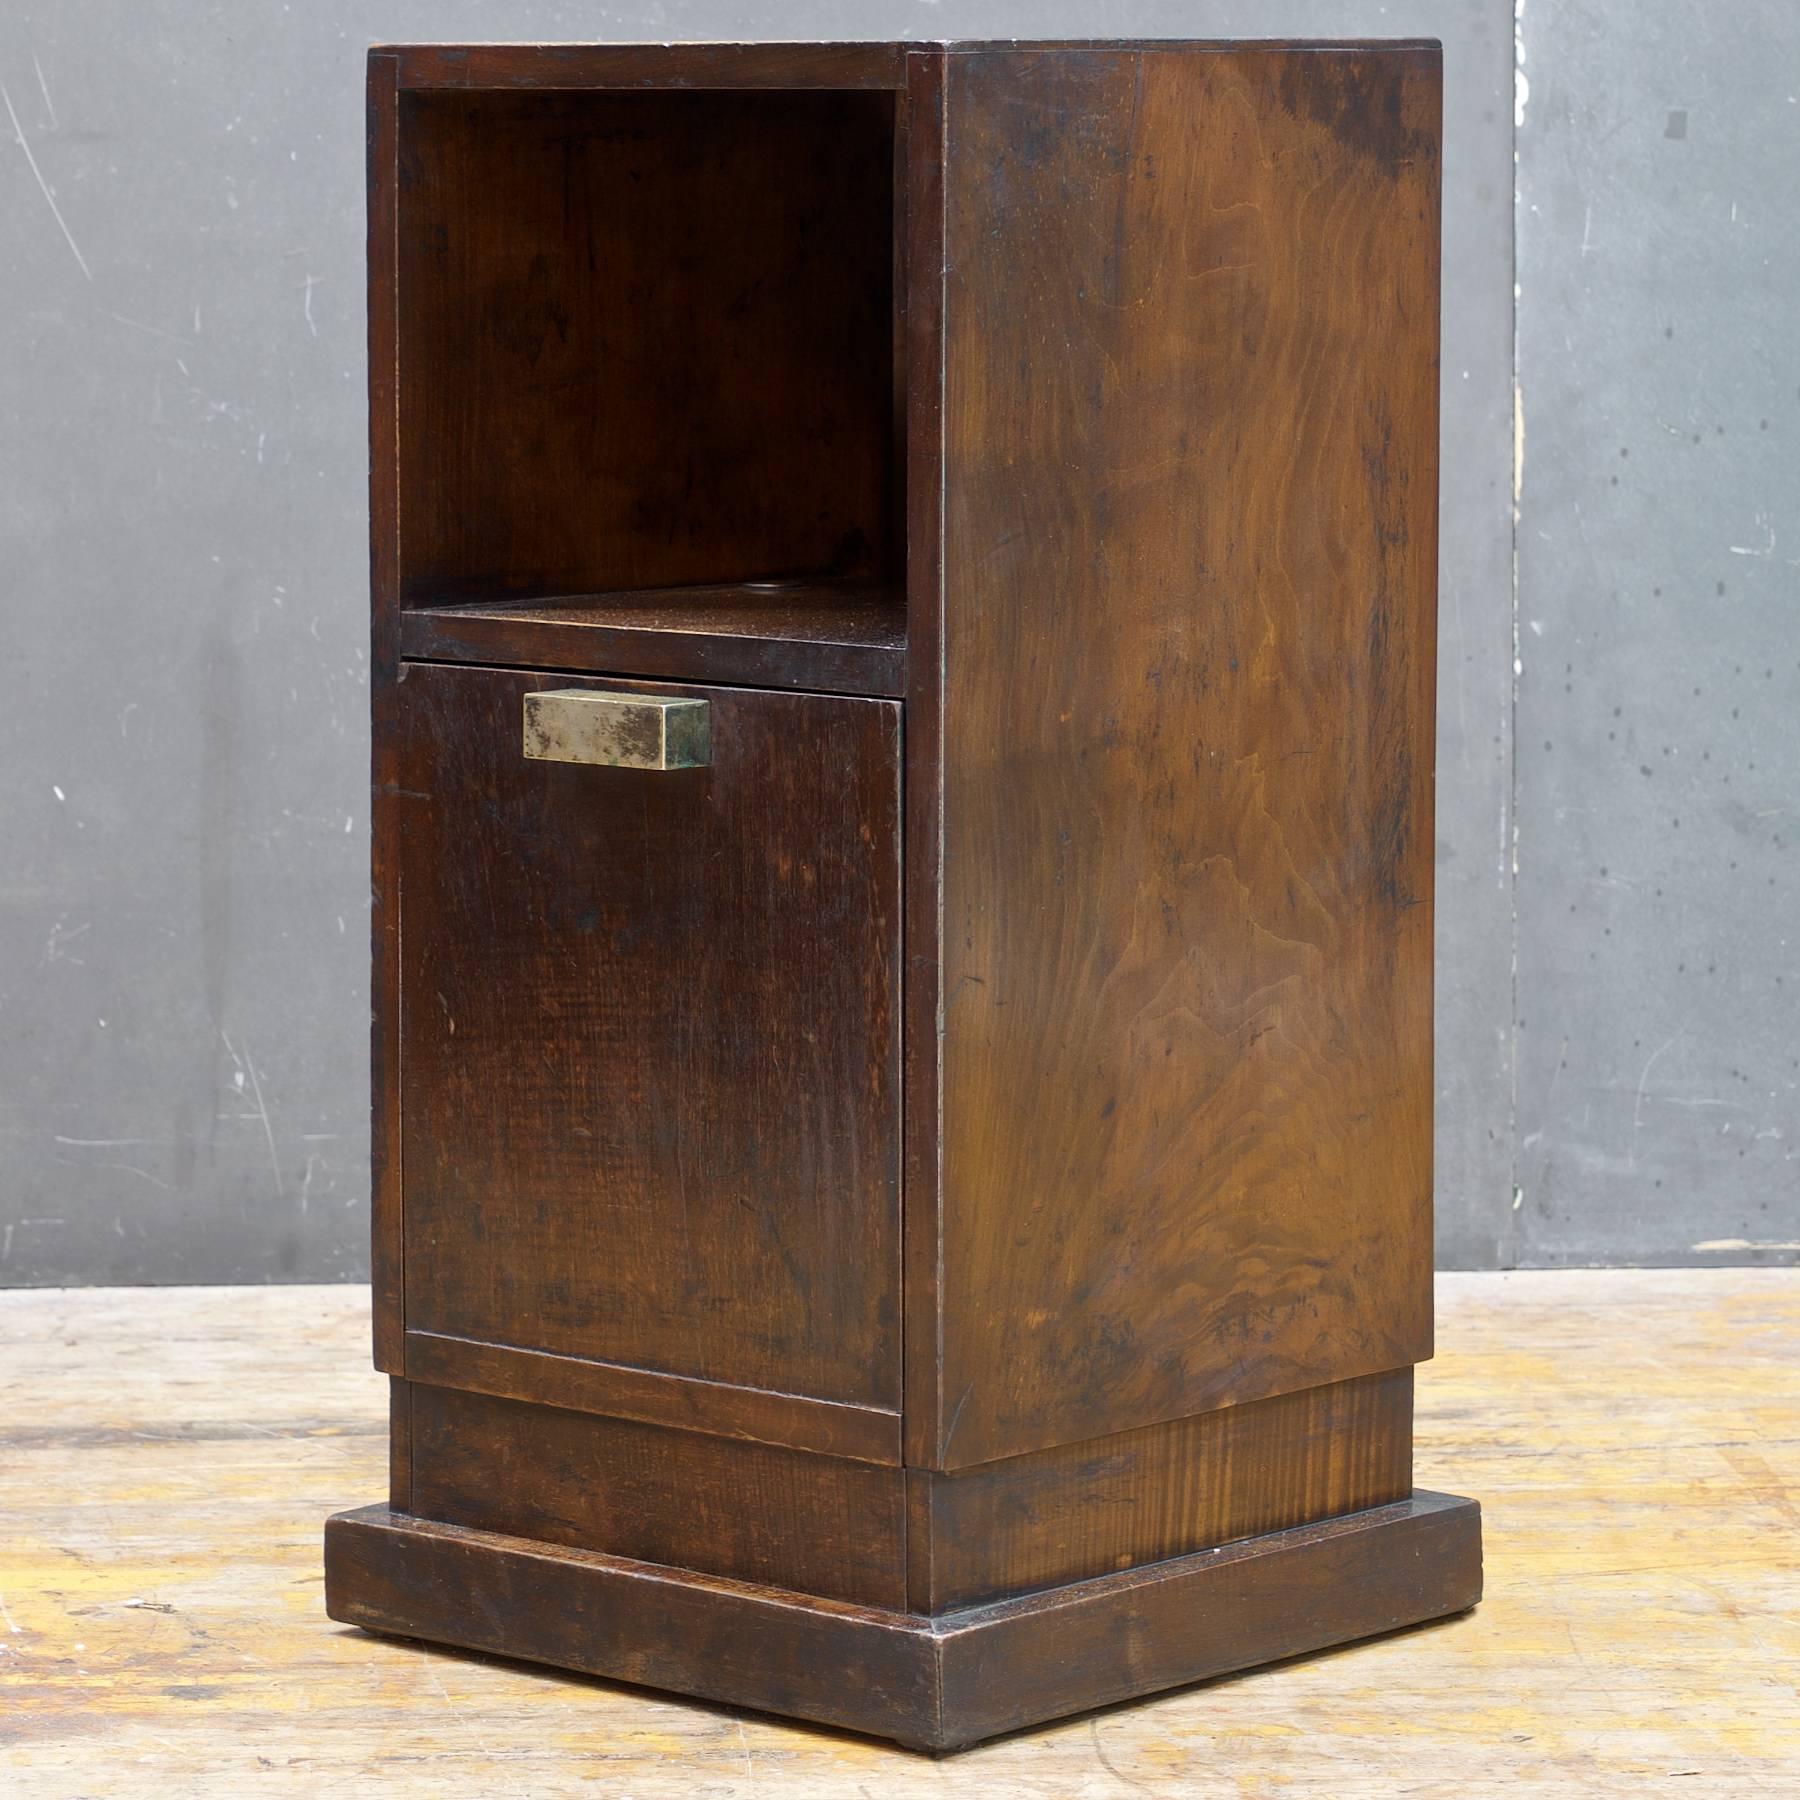 Heavily patina little nightstand, great look, and very old early modernist piece.

Measure: W 12.5 x D 13 x H 24.75 in.
 